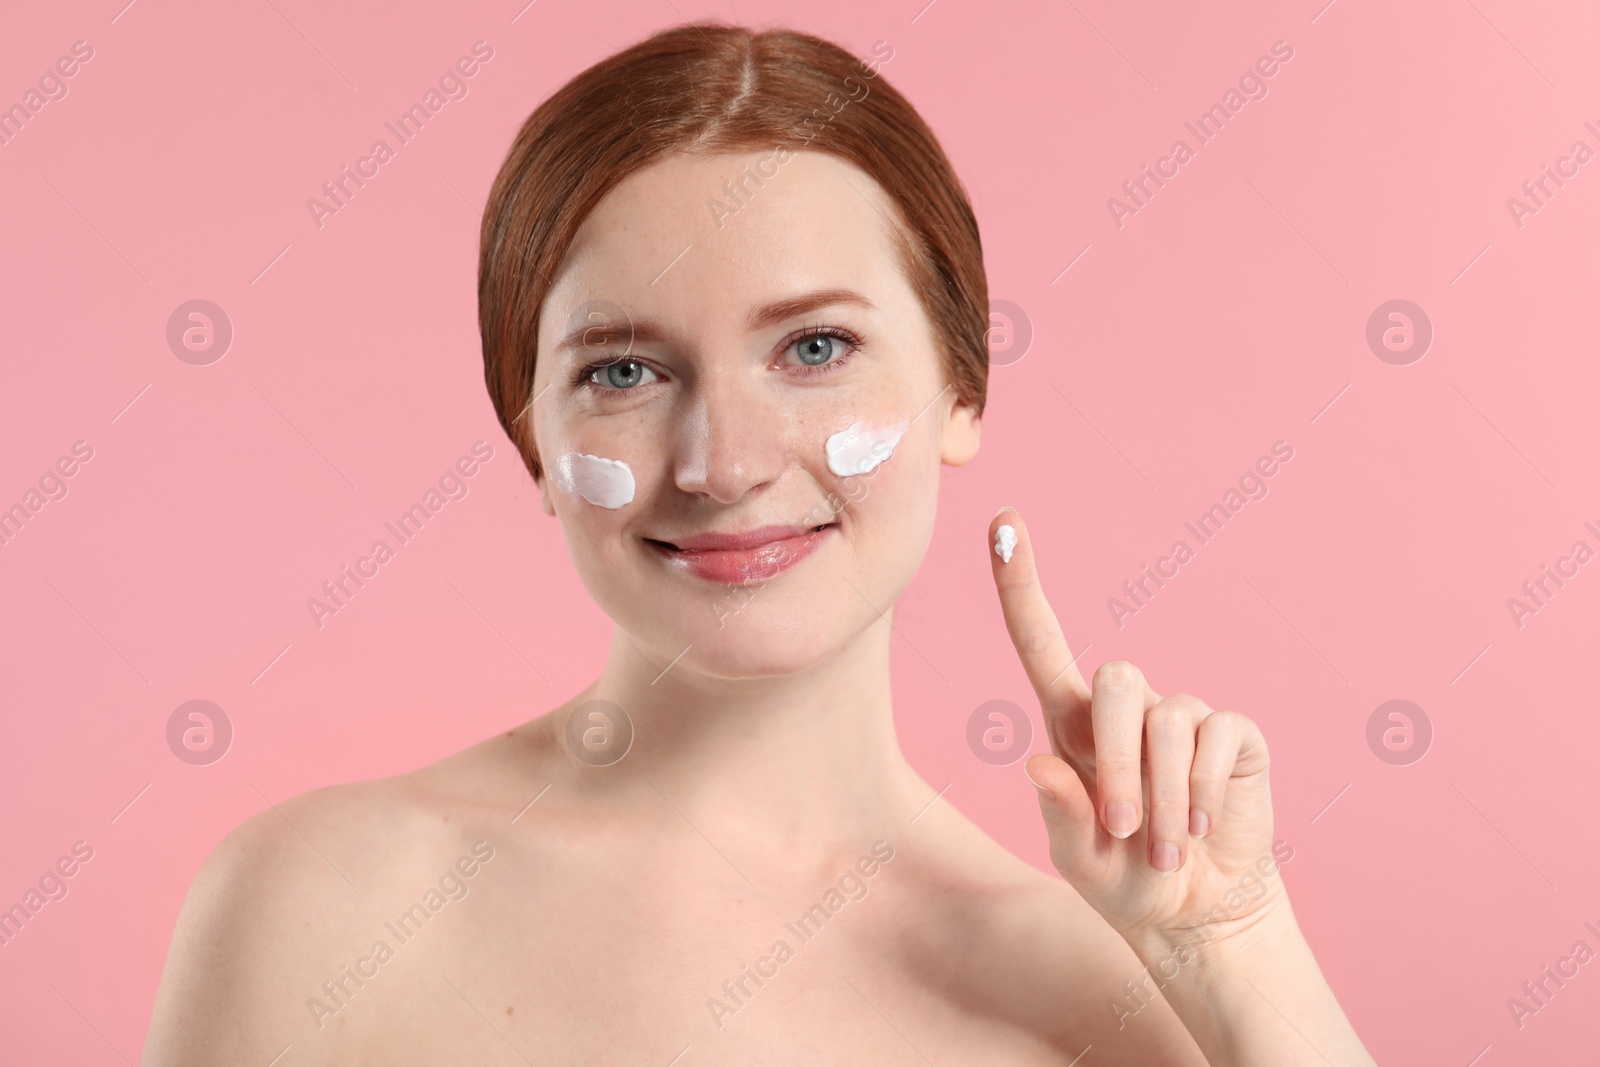 Photo of Beautiful woman with freckles and cream on her face against pink background